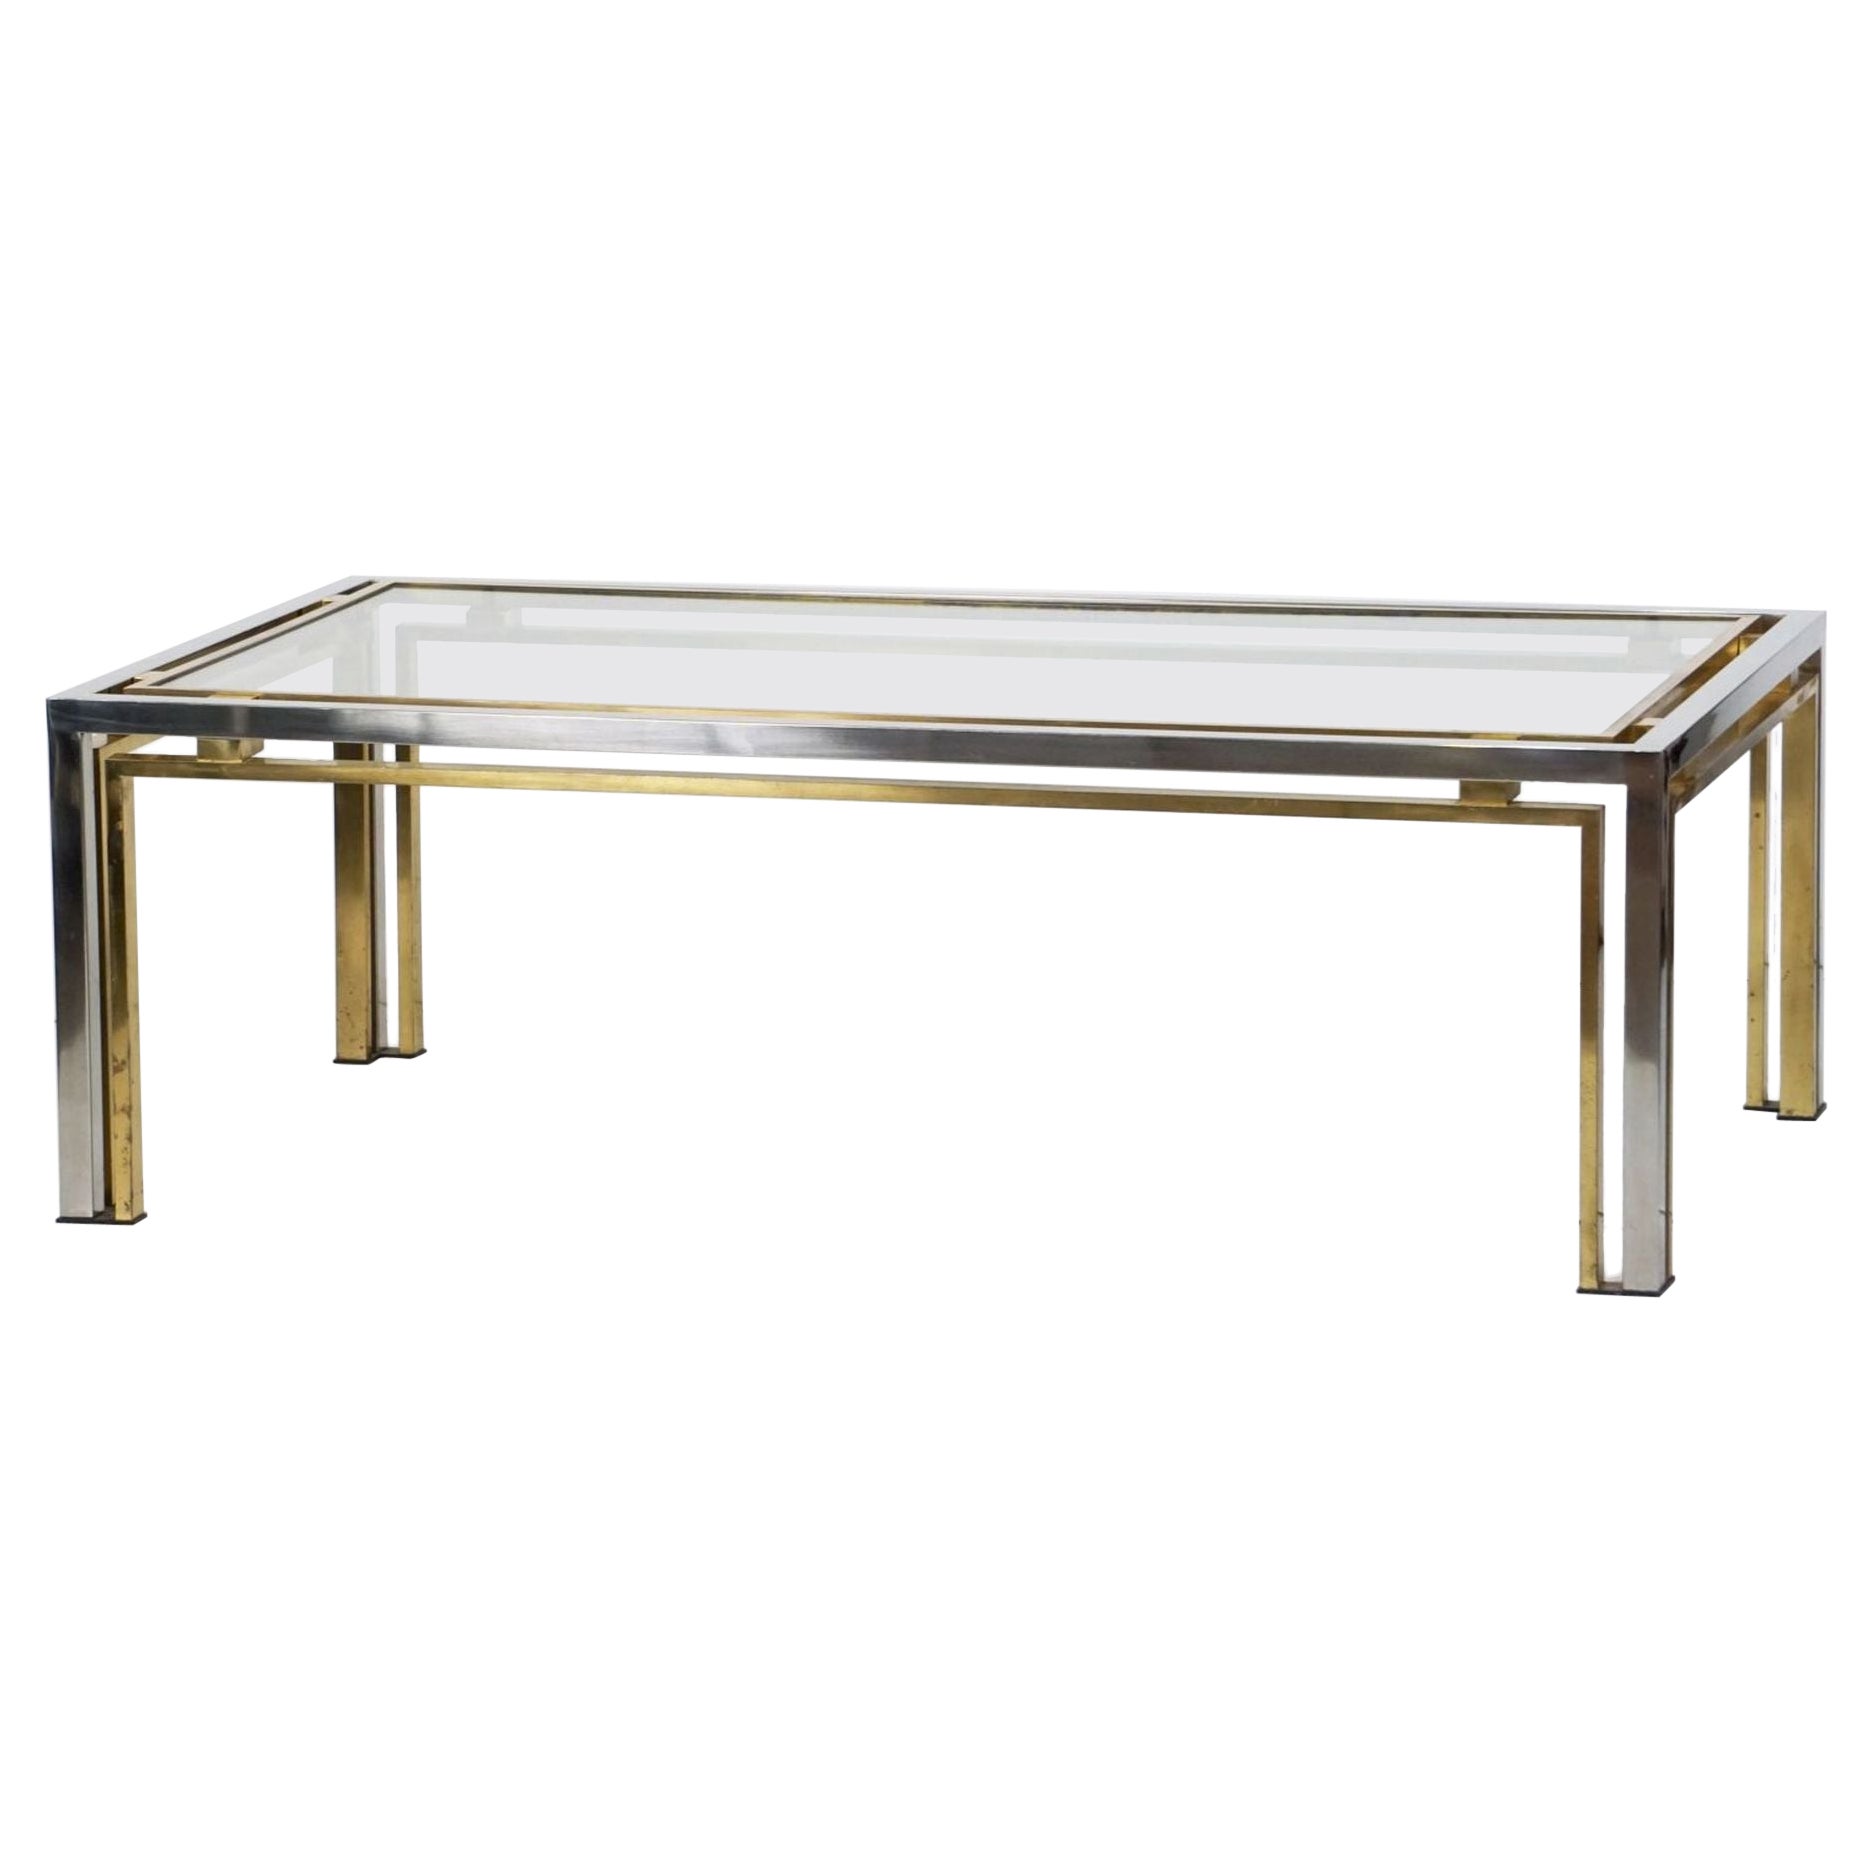 Italian Modernist Low or Coffee Table of Chrome and Brass, Attrib. Romeo Rega For Sale